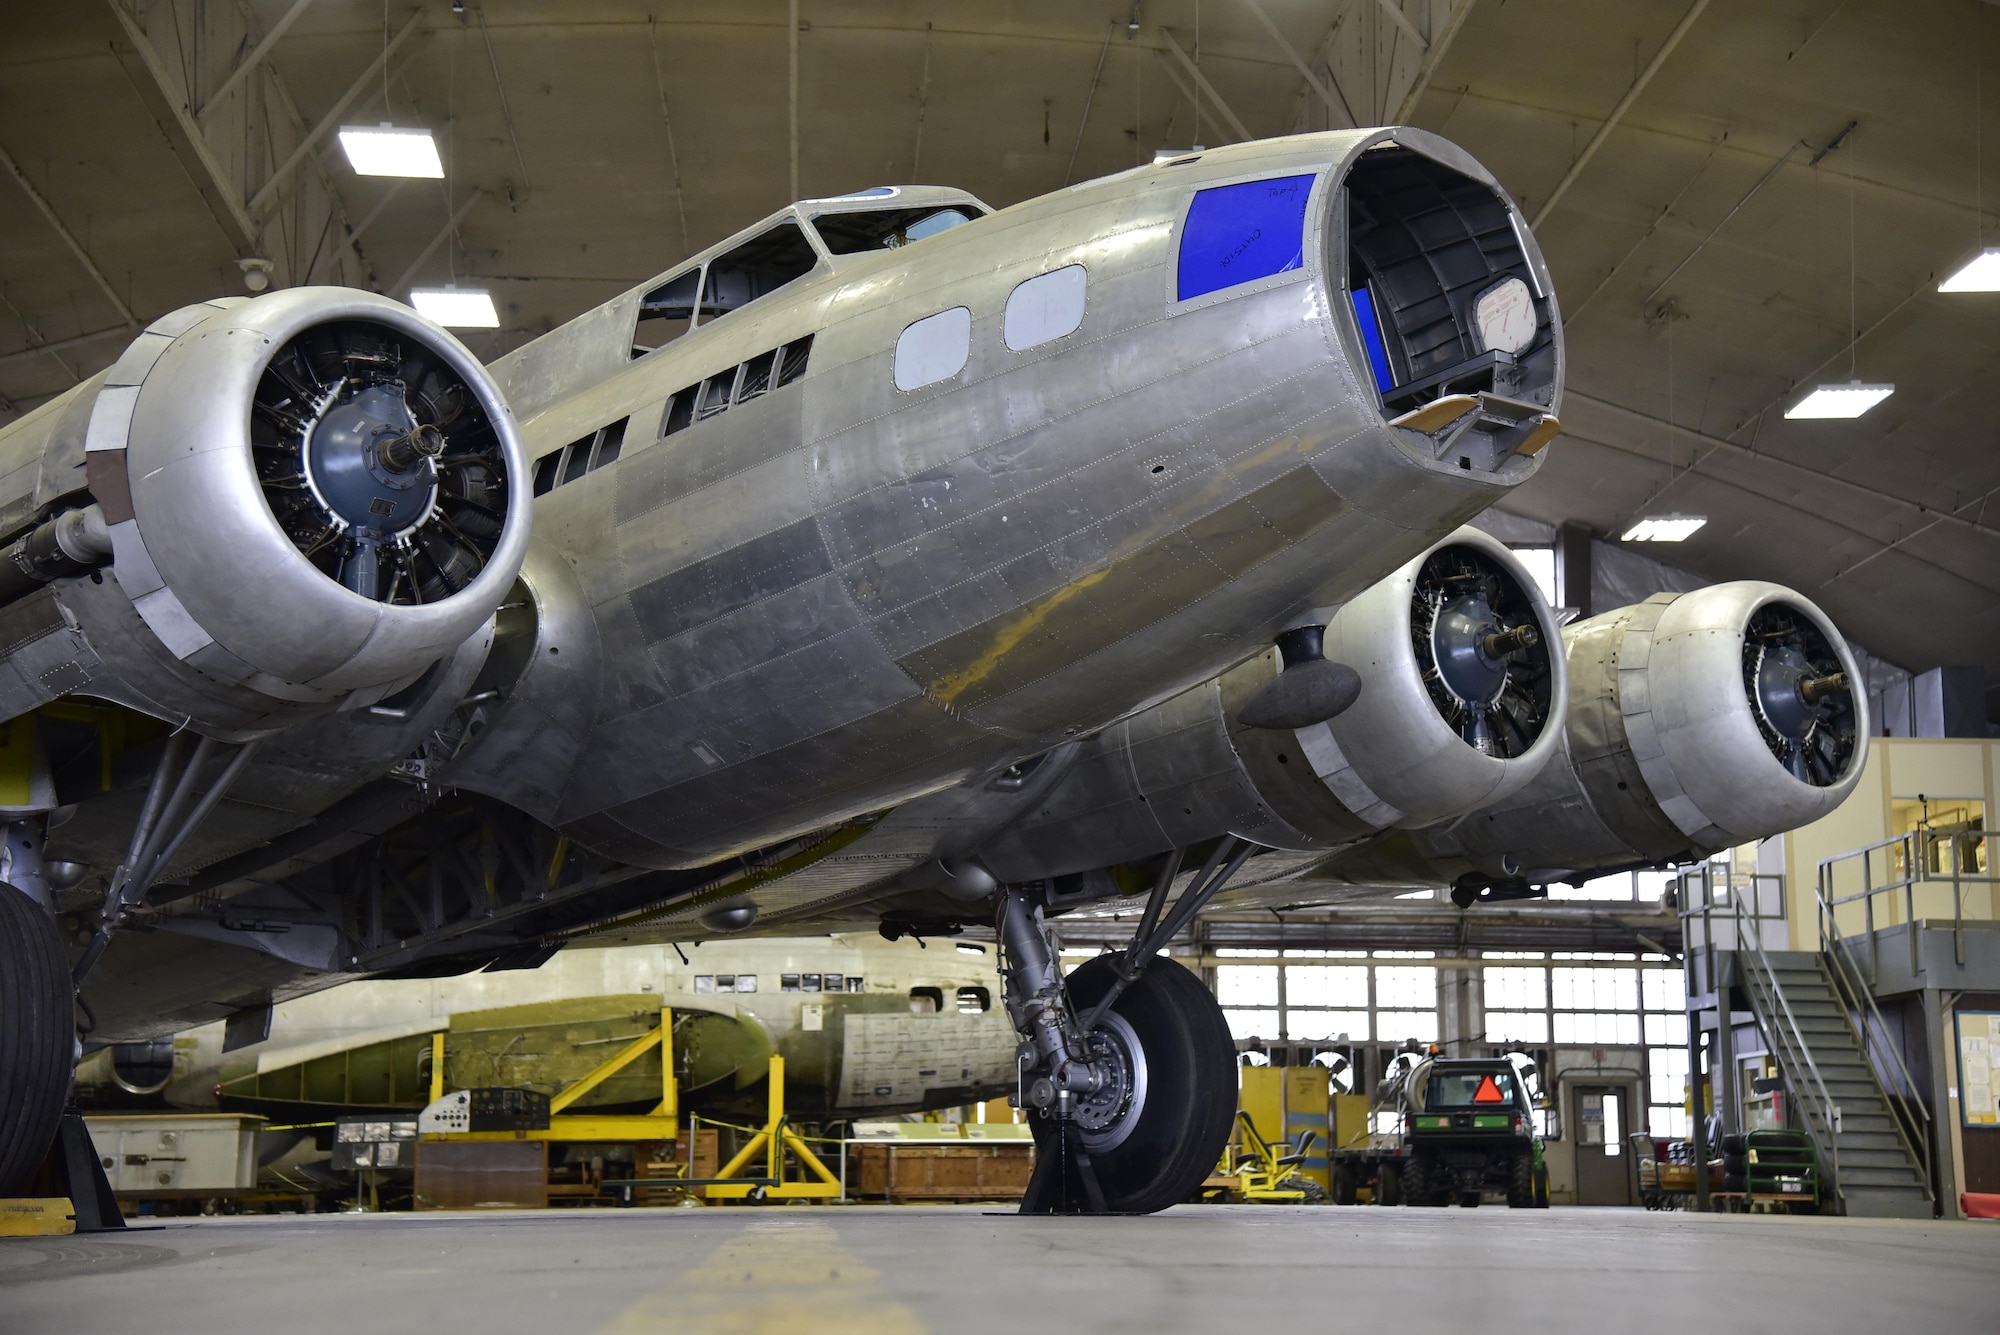 DAYTON, Ohio (02/2017) -- Restoration crews cleaned the Boeing B-17F Memphis Belle, and moved it to another hangar with additional space on Feb. 22, 2017 at the National Museum of the United States Air Force. (U.S. Air Force photo by Ken LaRock)